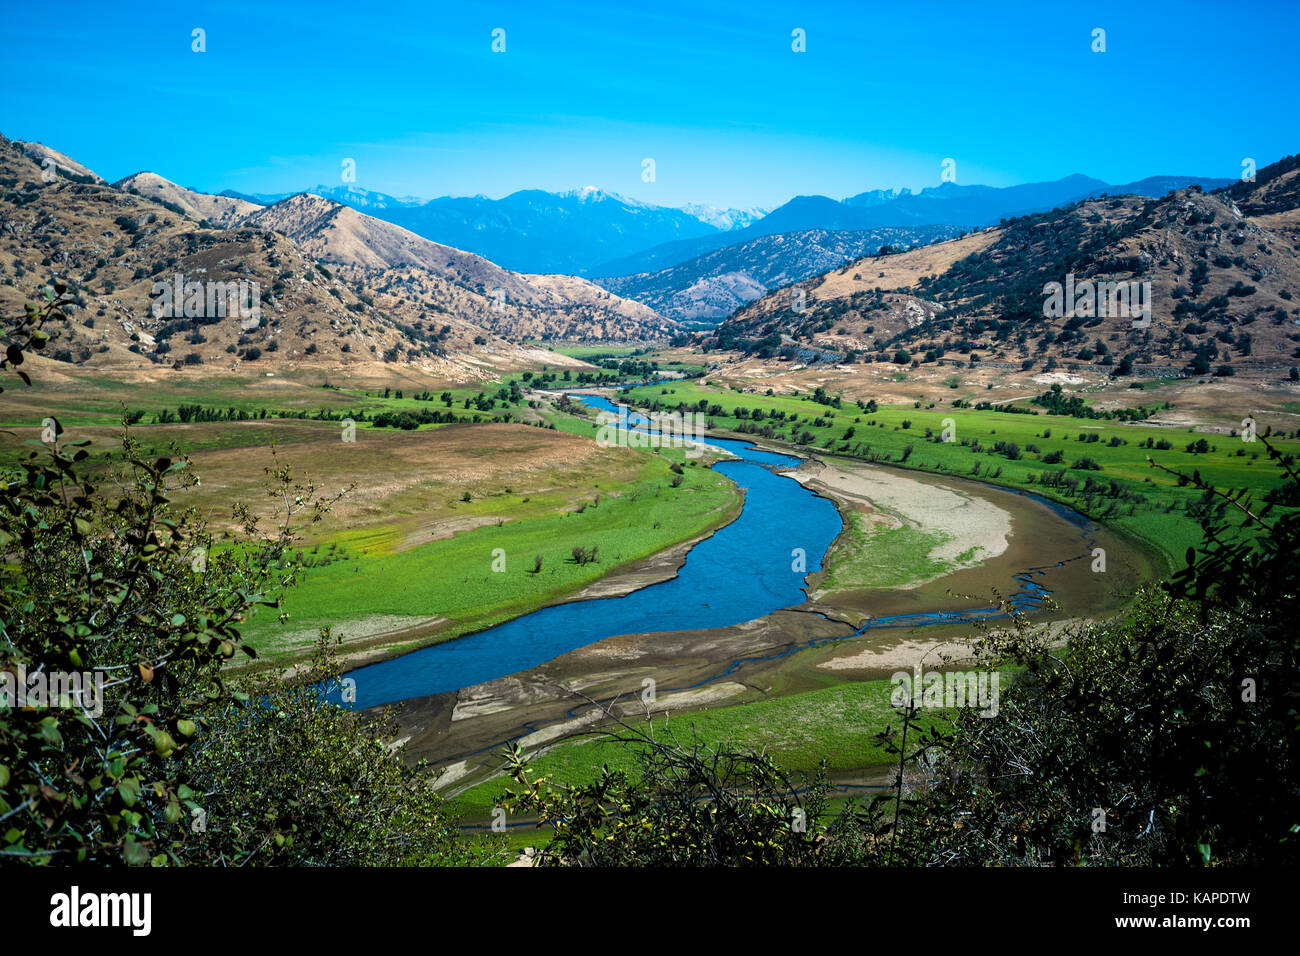 Scenic View of Three Rivers and Sierra Nevada Mountains, located in Three Rivers, California. Stock Photo